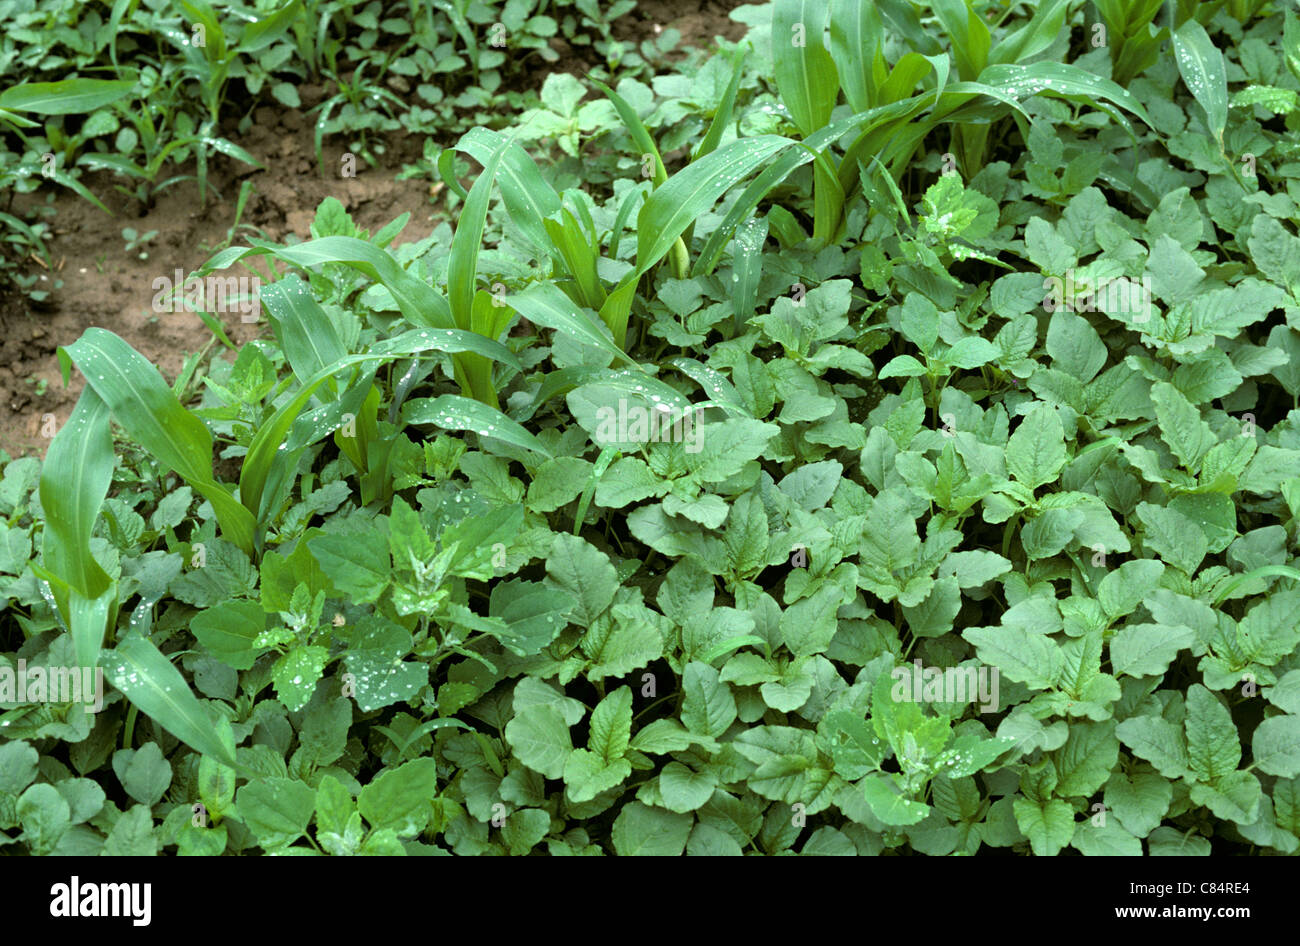 Amaranth or pigweed (Amaranthus sp.) and other weeds in a young maize or corn crop, Alsace, France Stock Photo